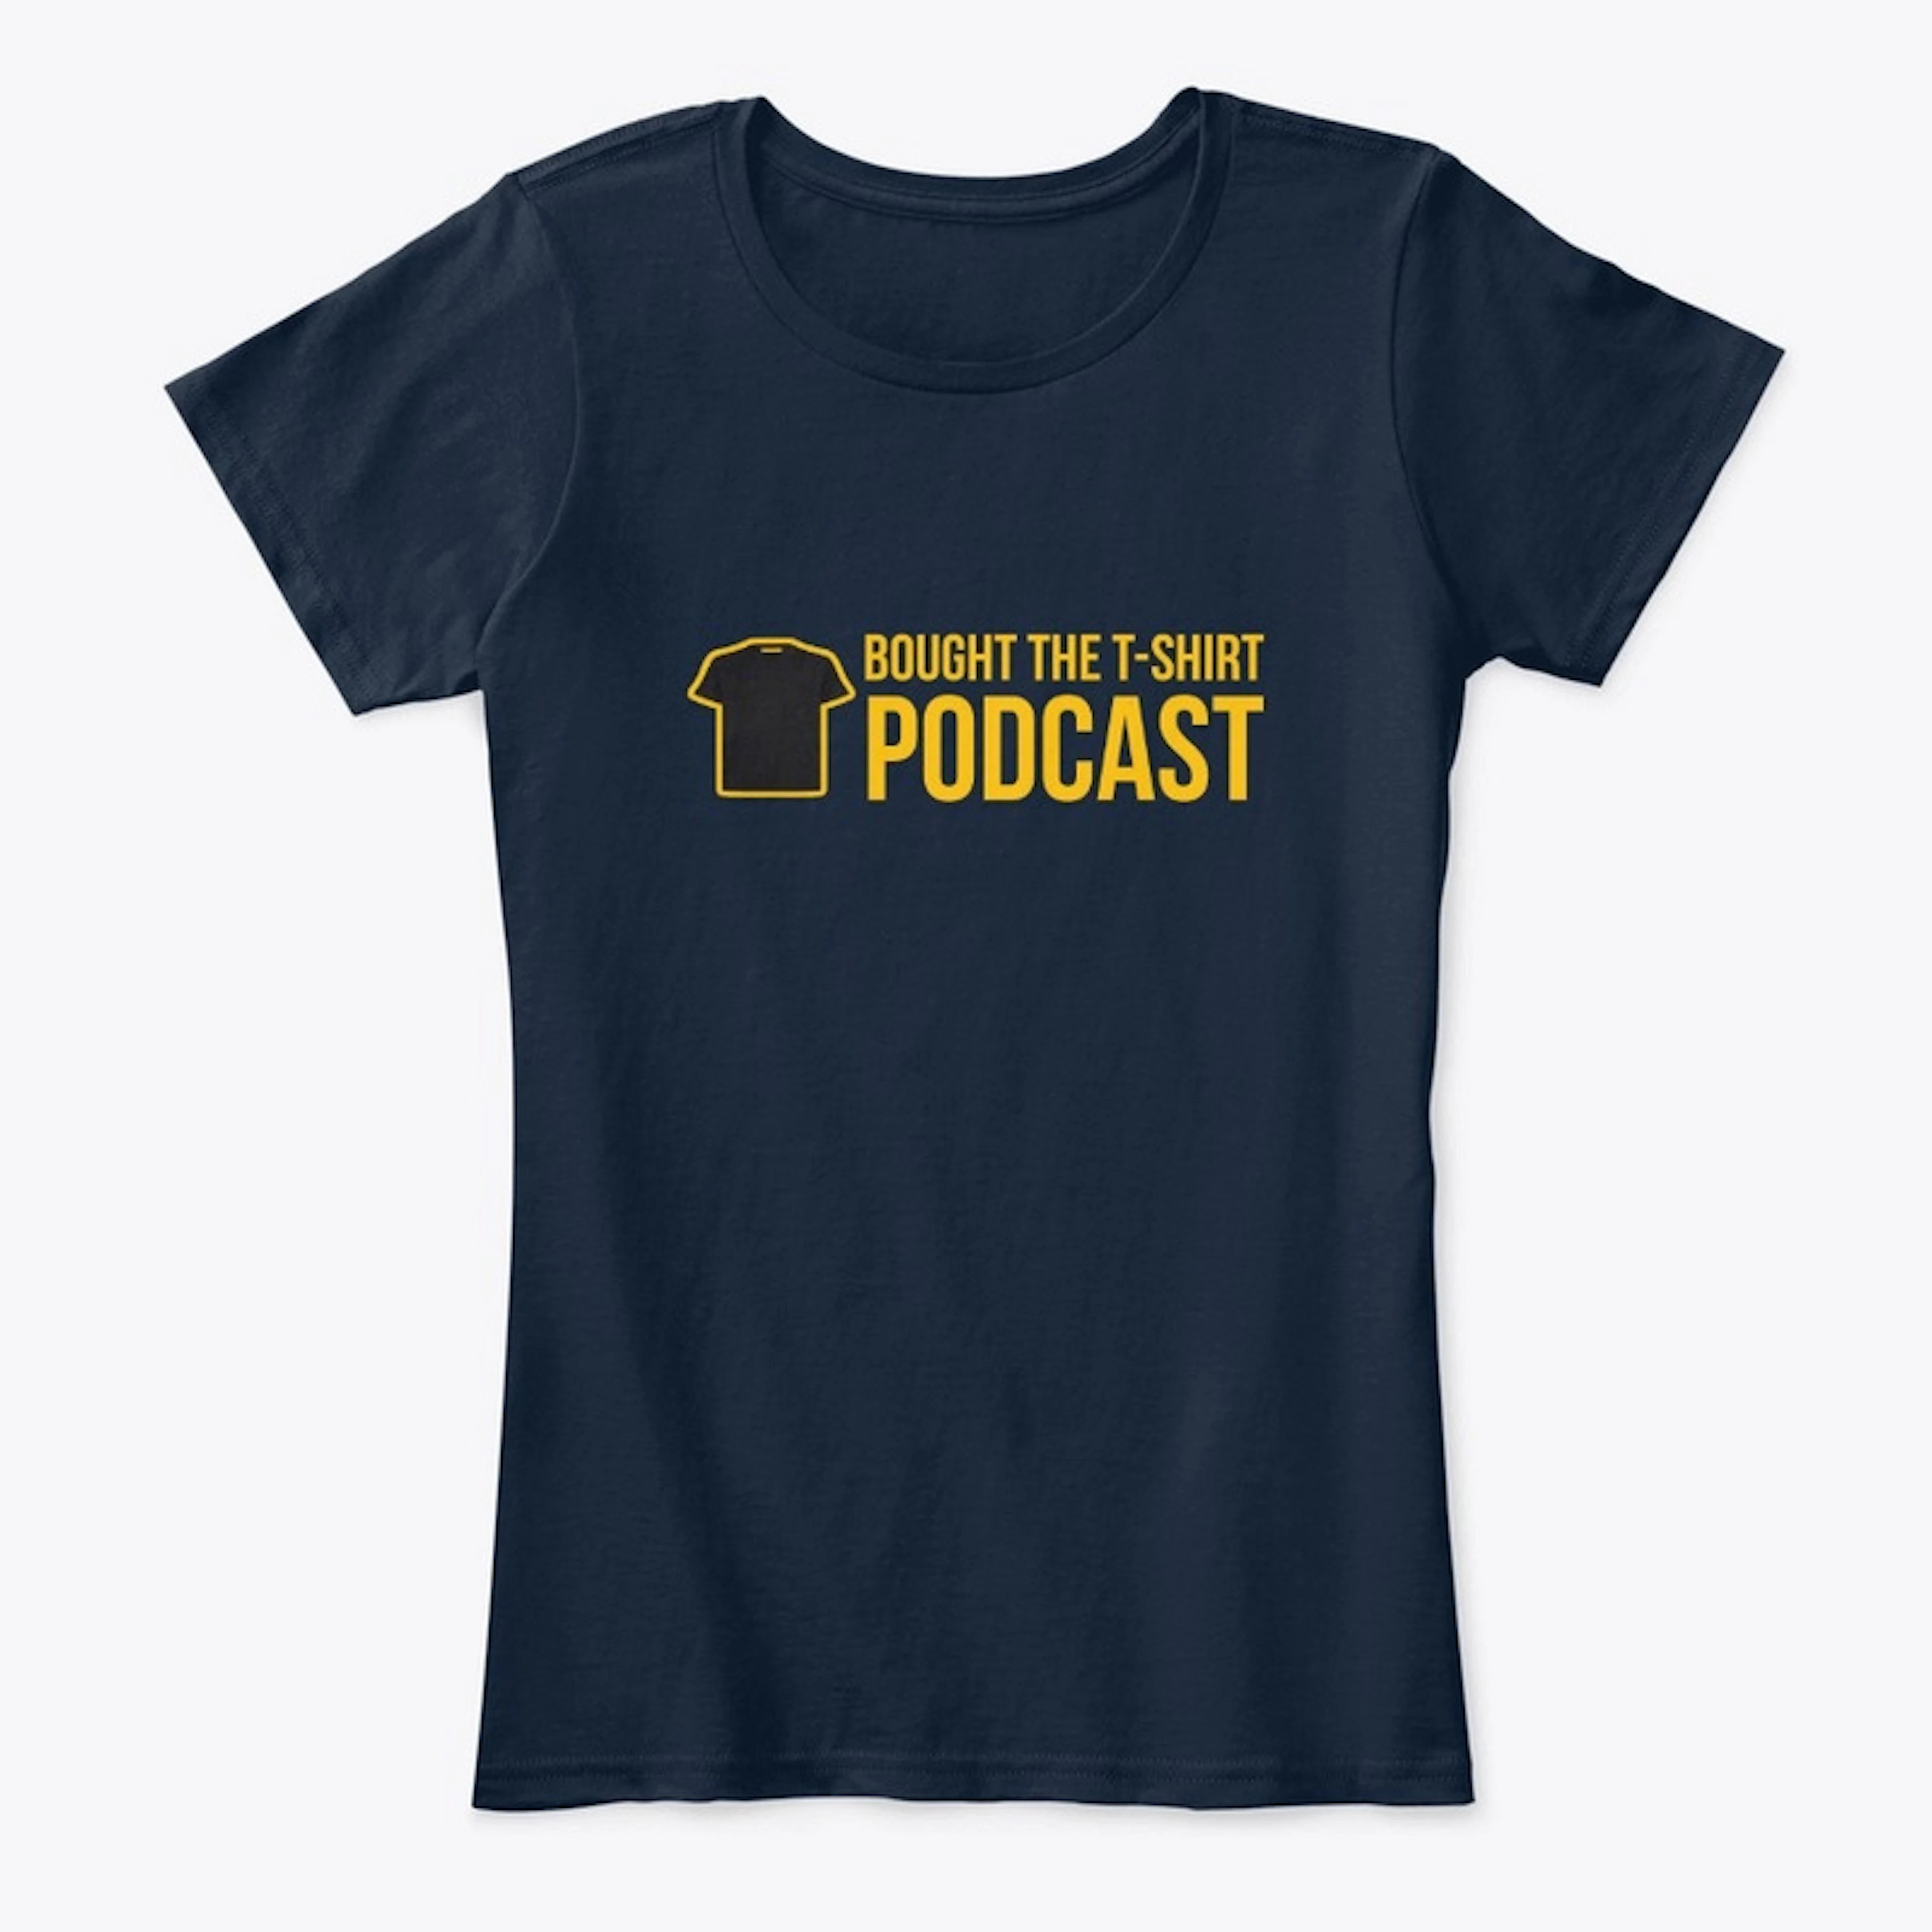 Bought the T-Shirt Podcast